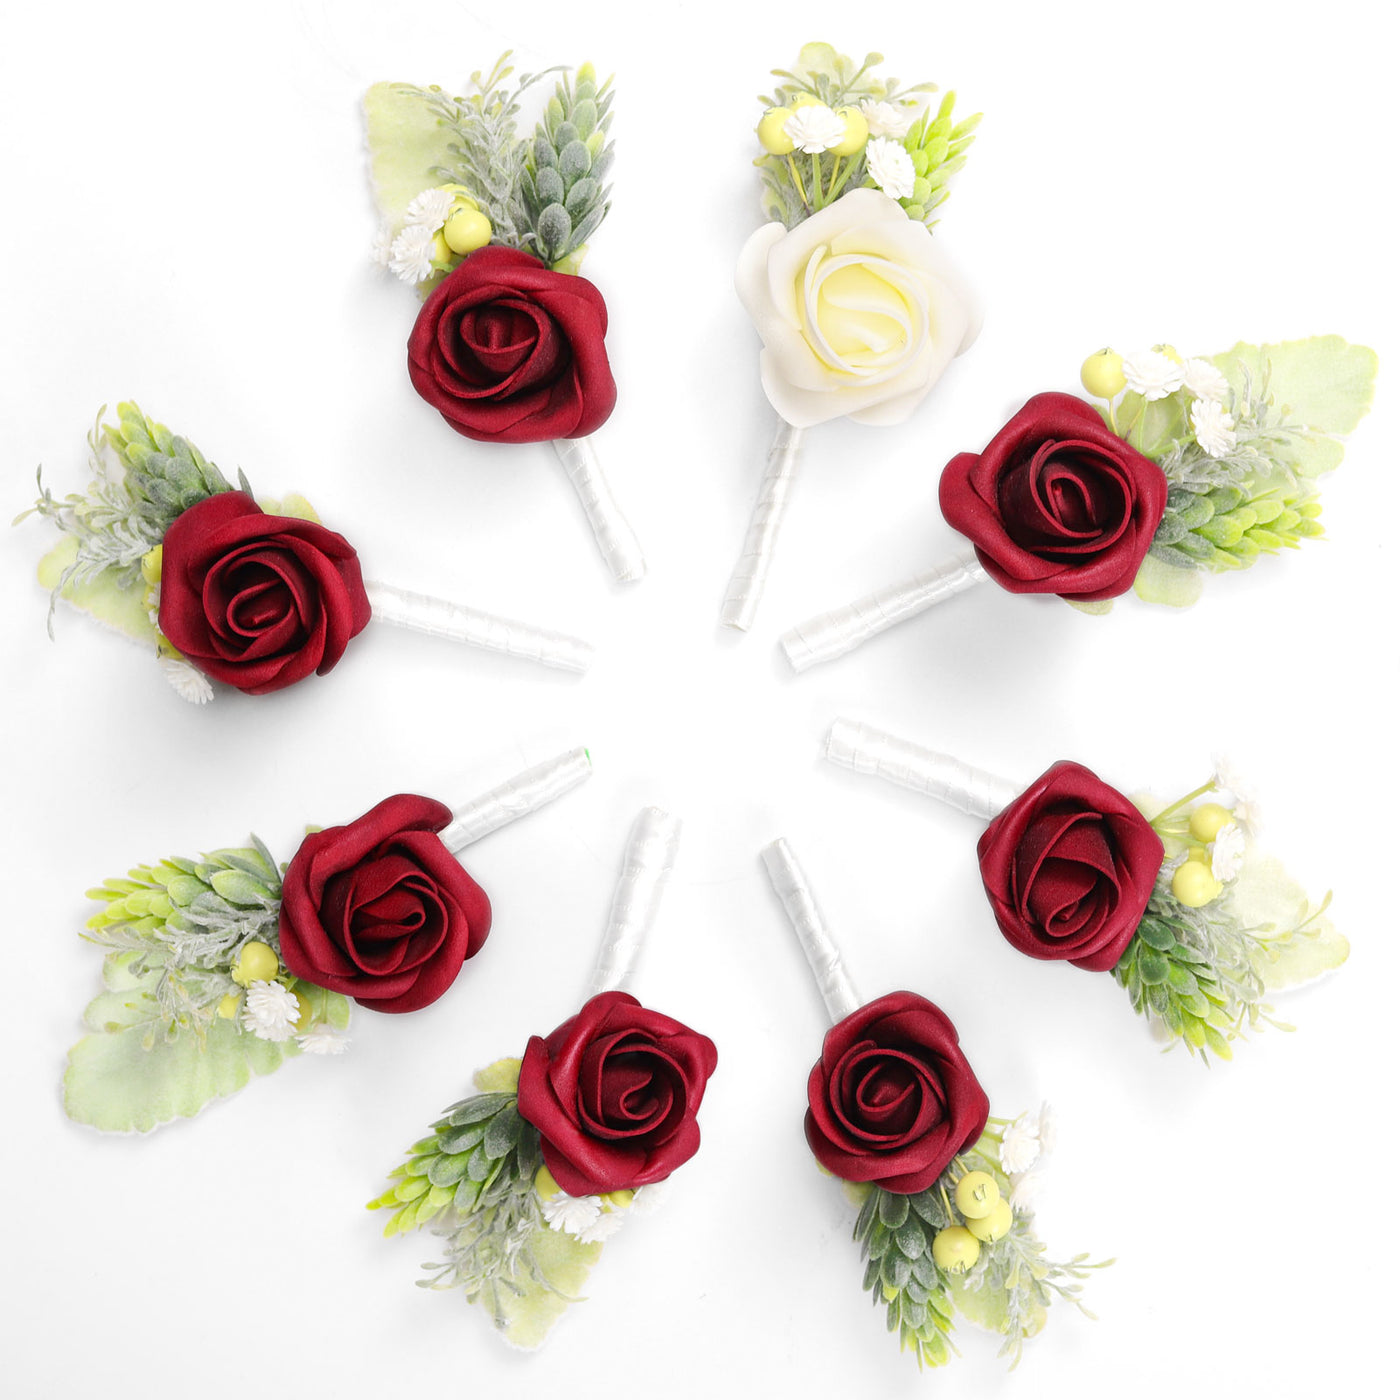 Wedding Boutonnieres with Pins Set of 8 - 1 White & 7 Burgundy